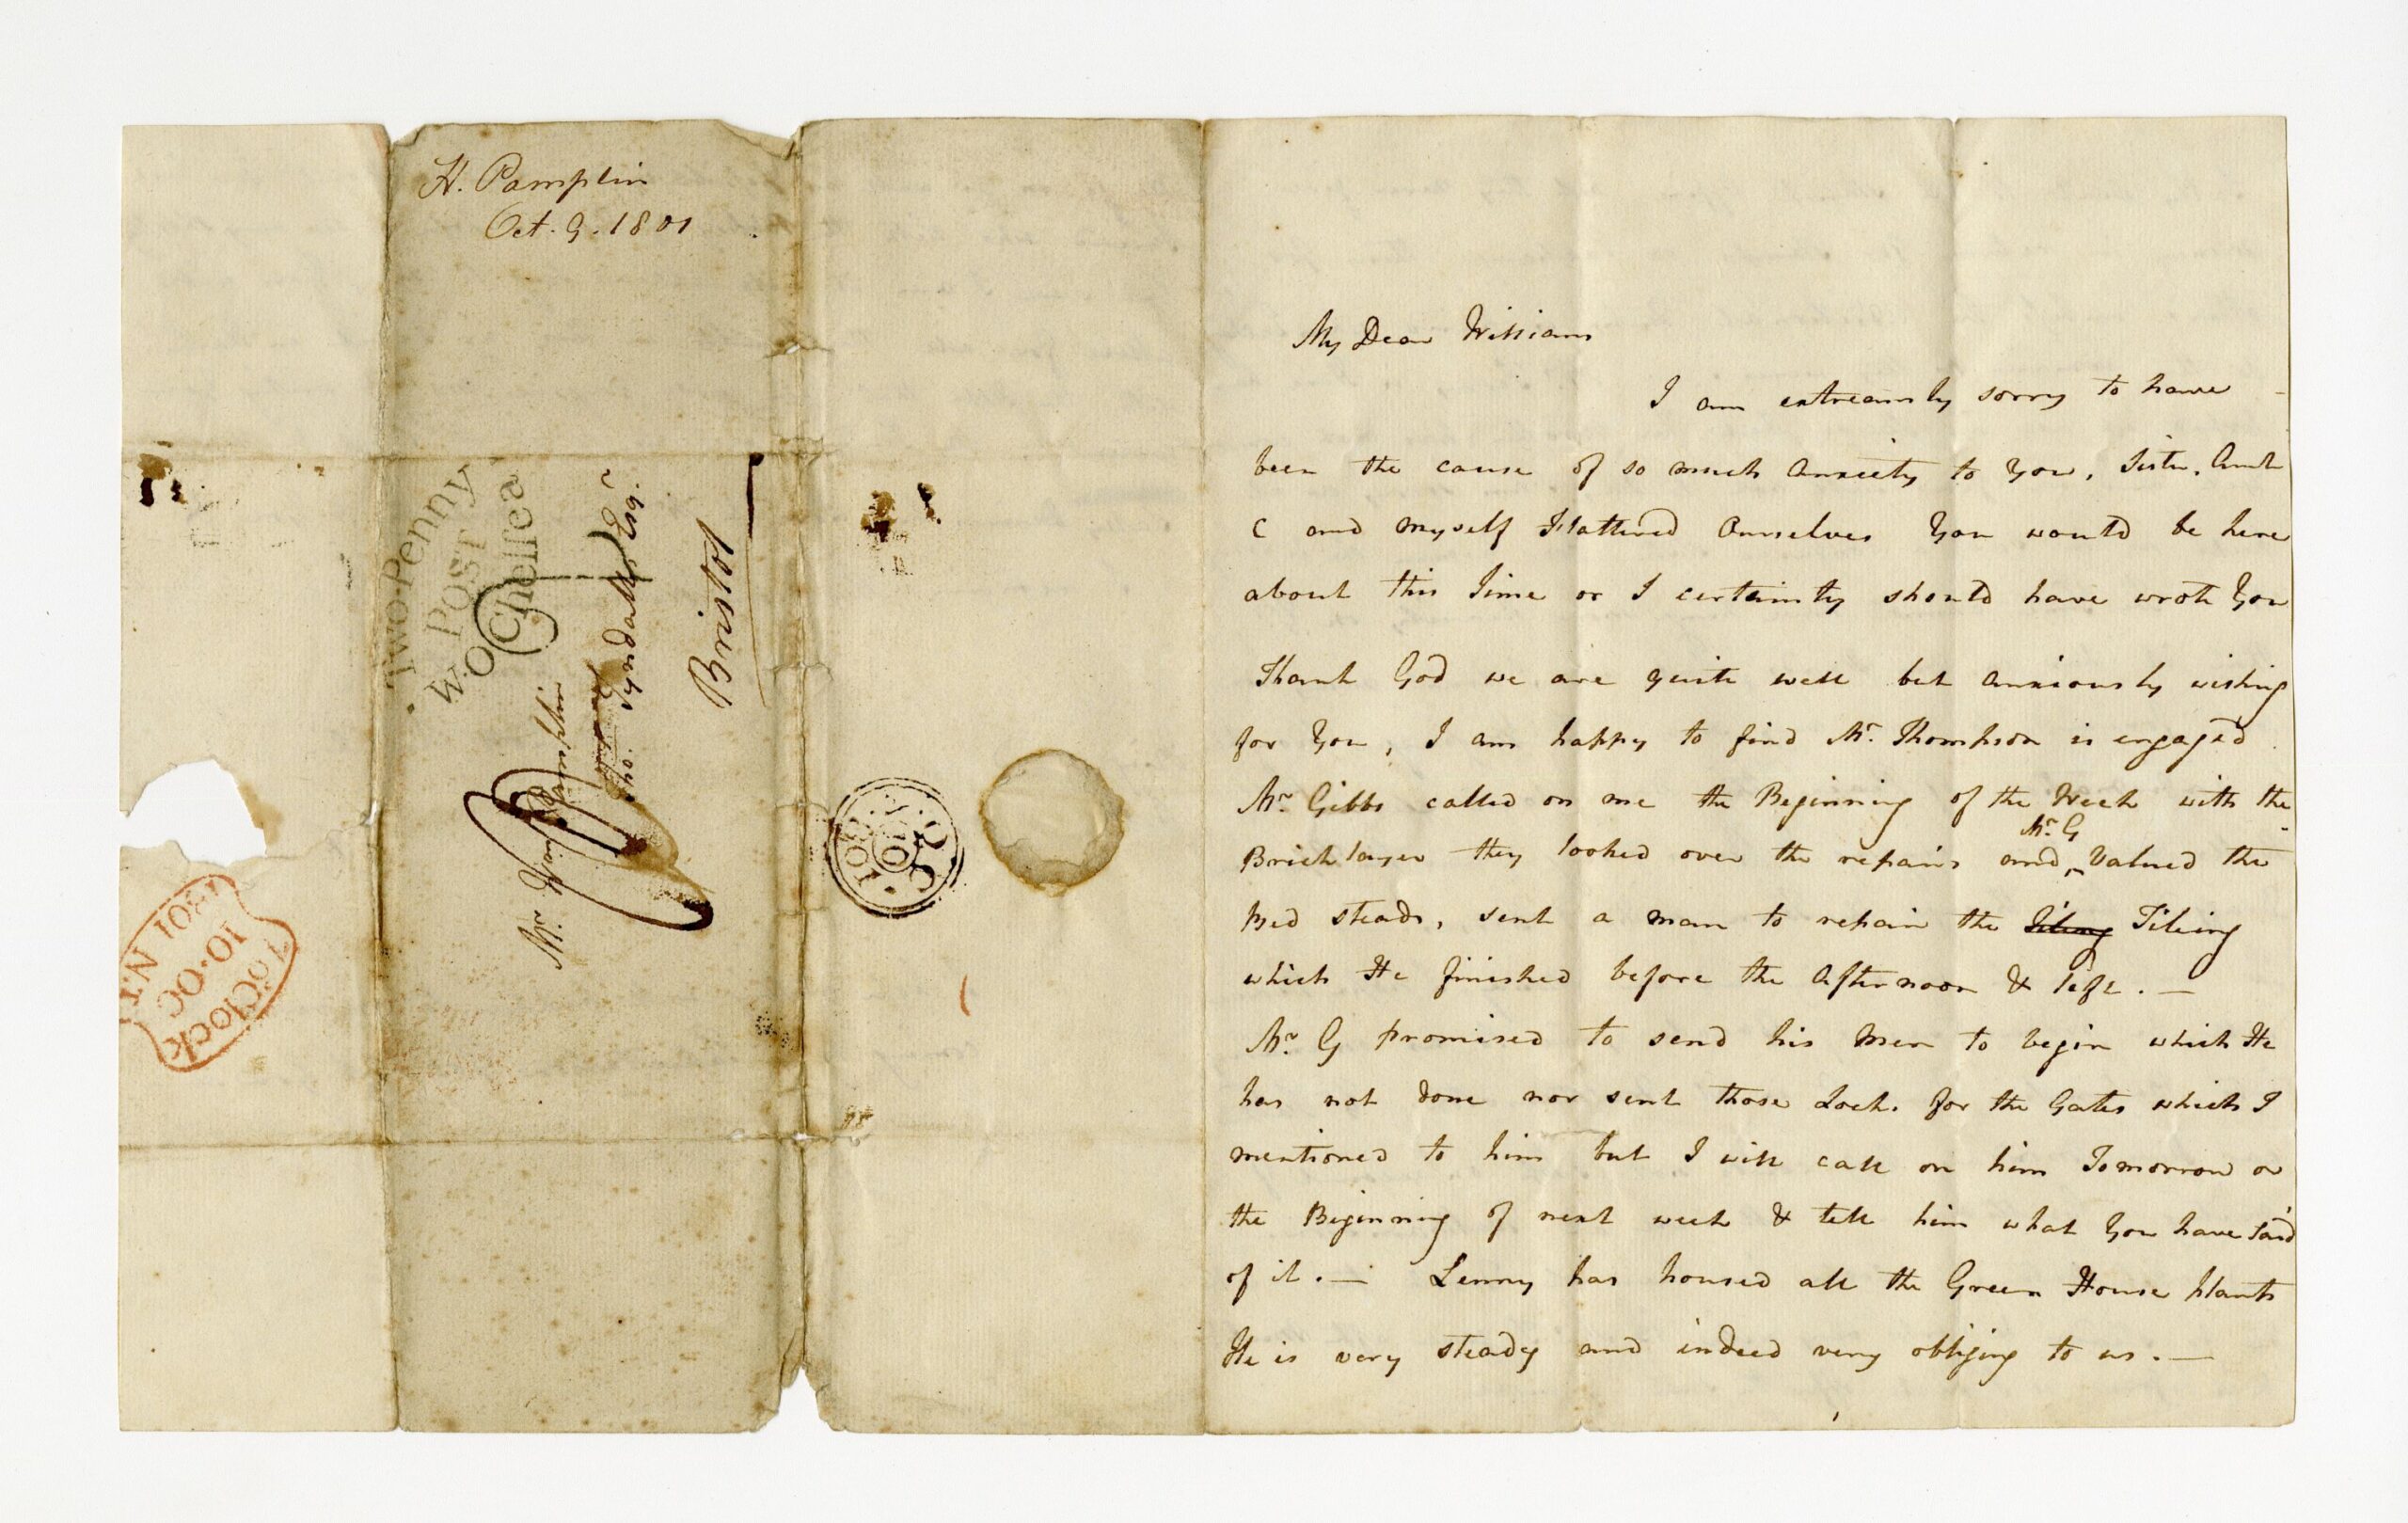 A handwritten letter on yellowing paper dated 1801